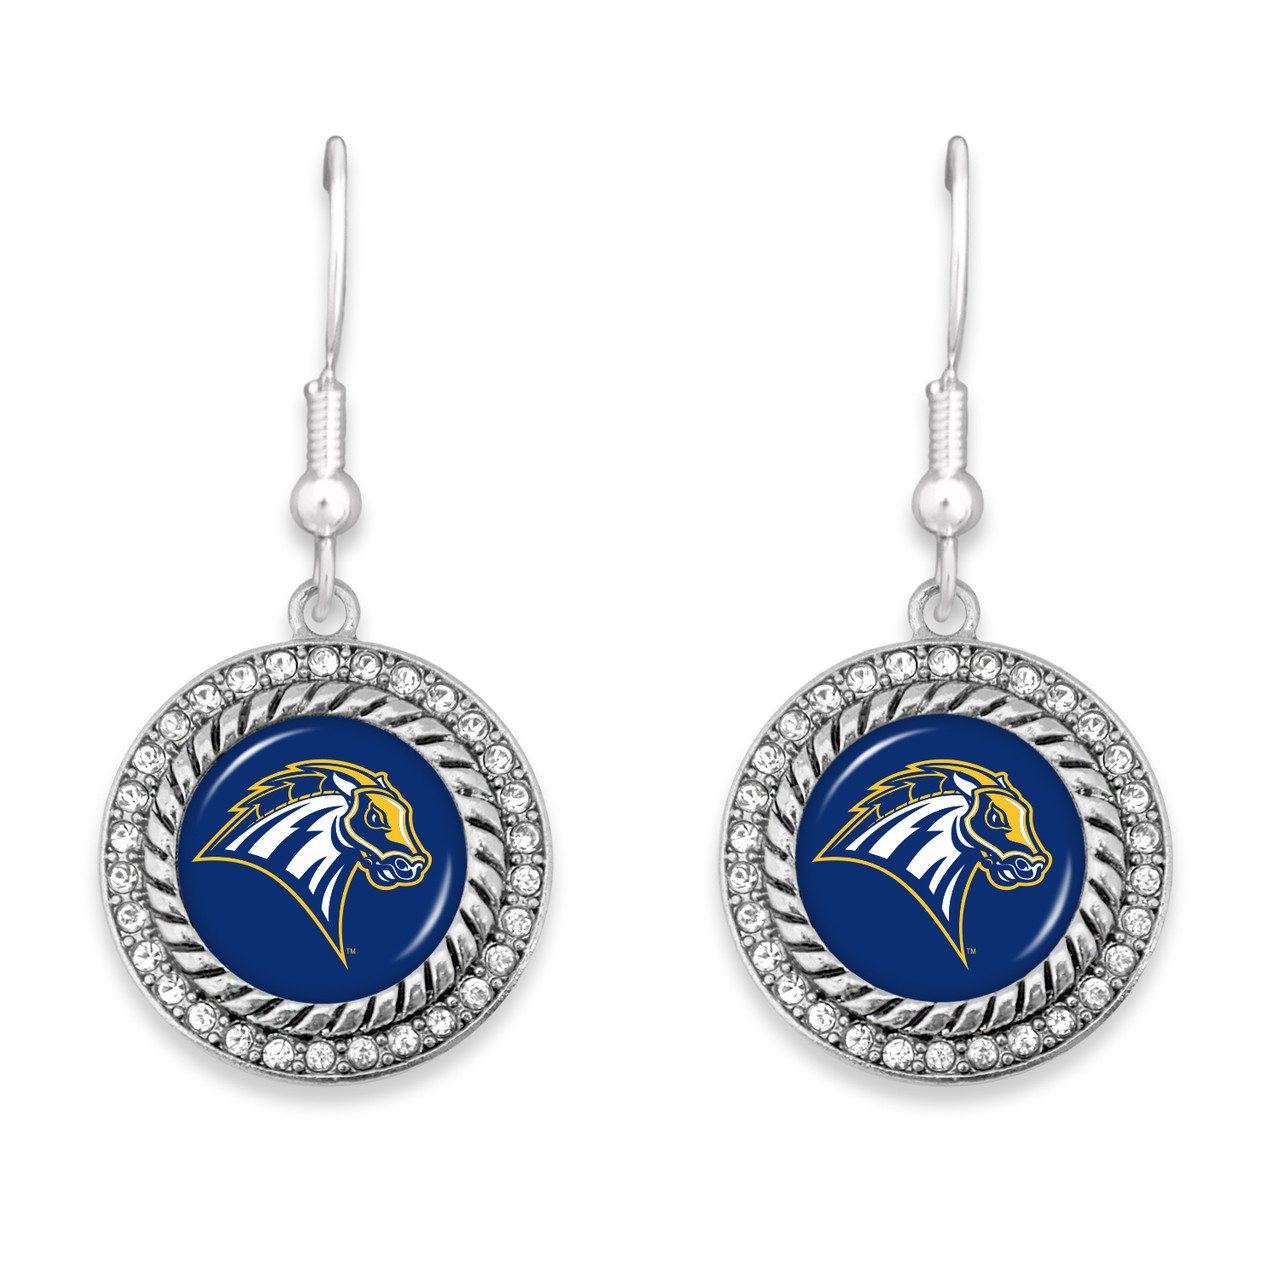 New Haven Chargers Earrings- Allie